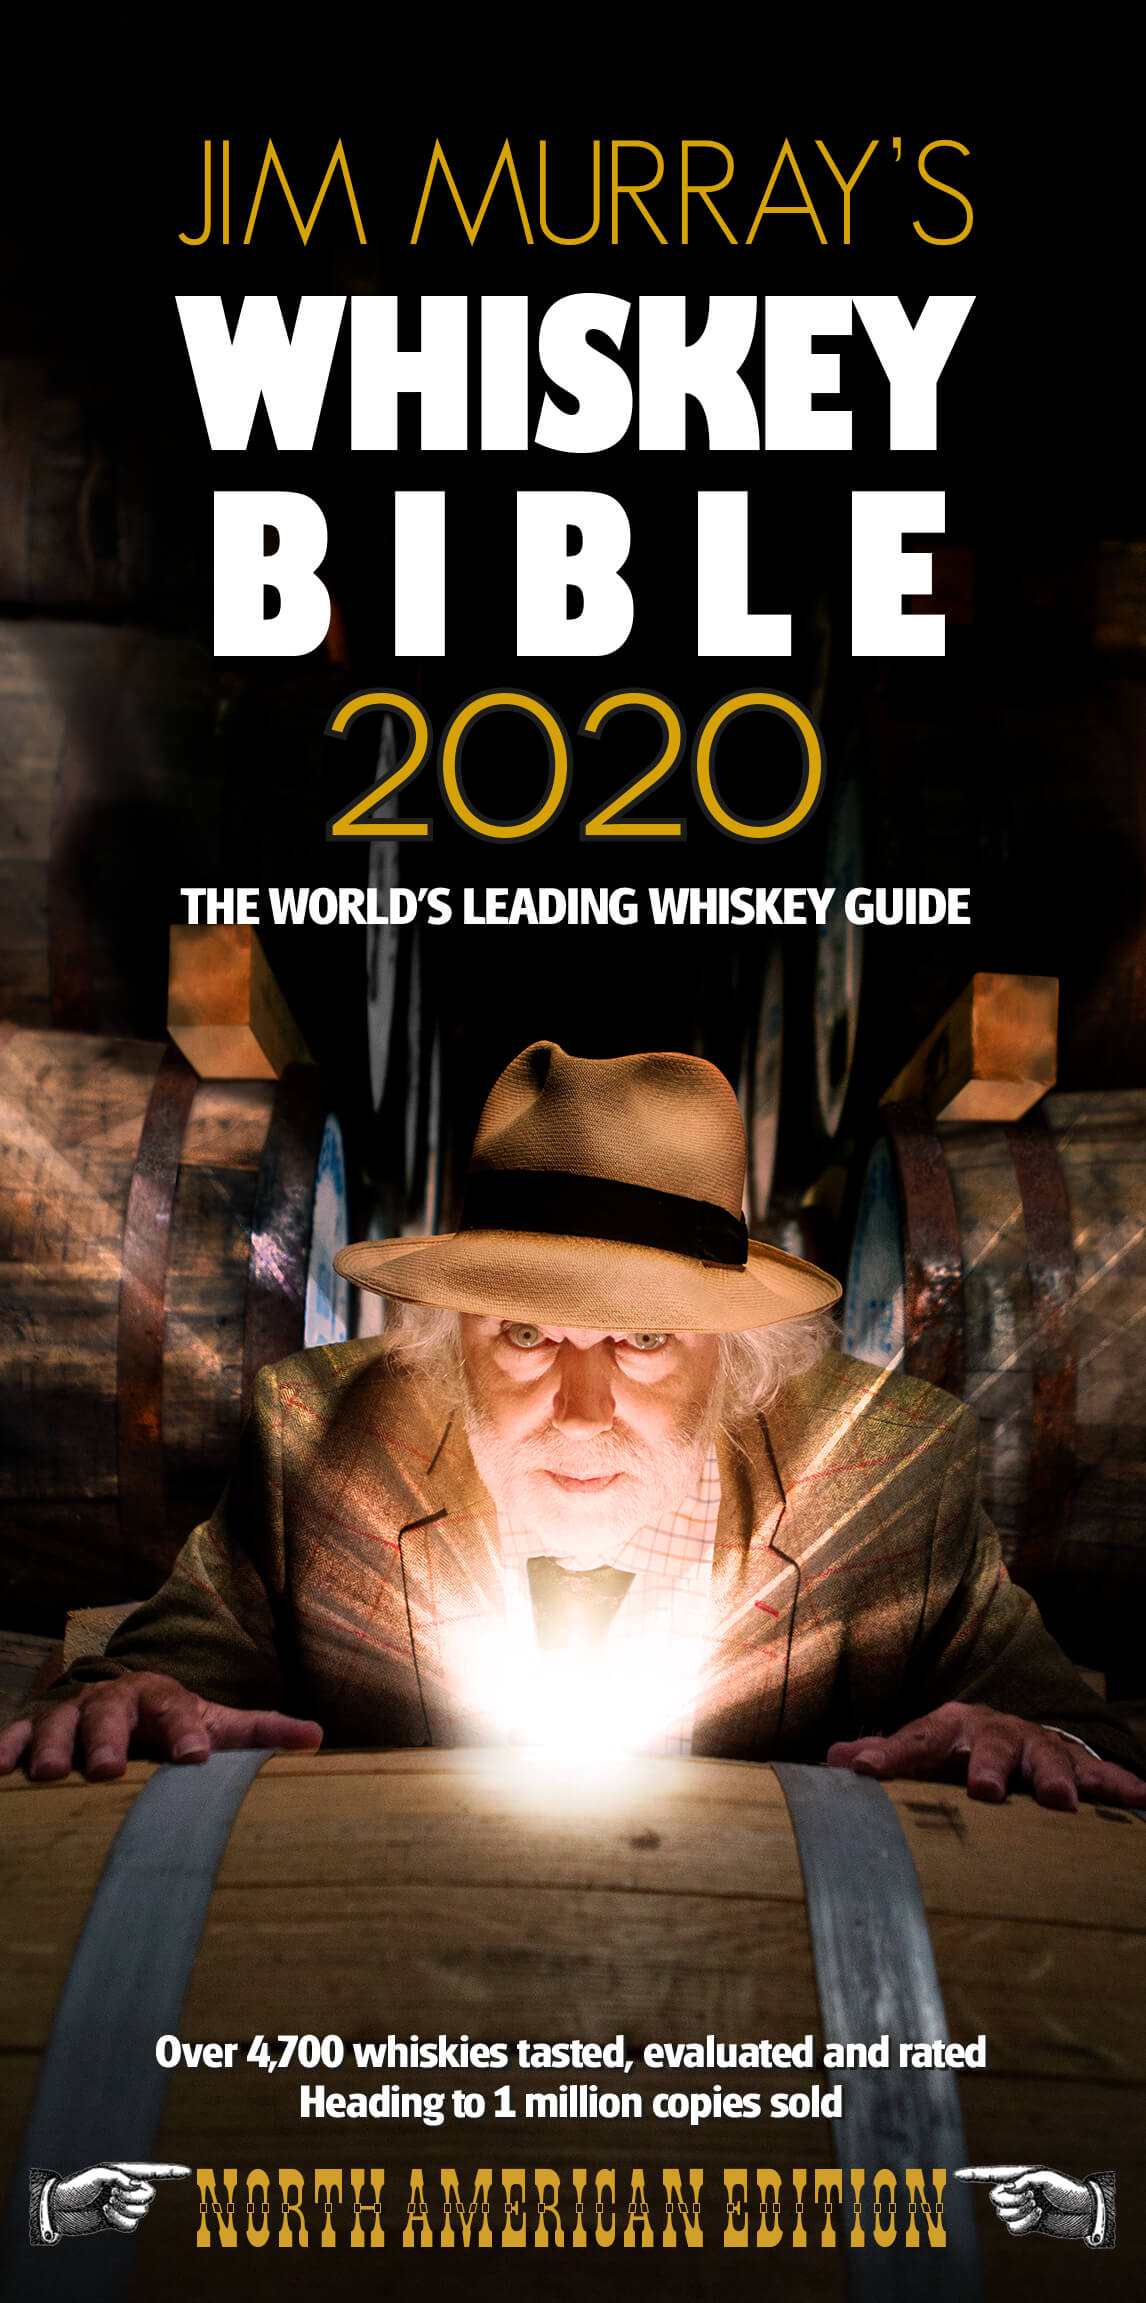 Jim Murray's Whiskey Bible 2020 North American Edition Whiskey Guide